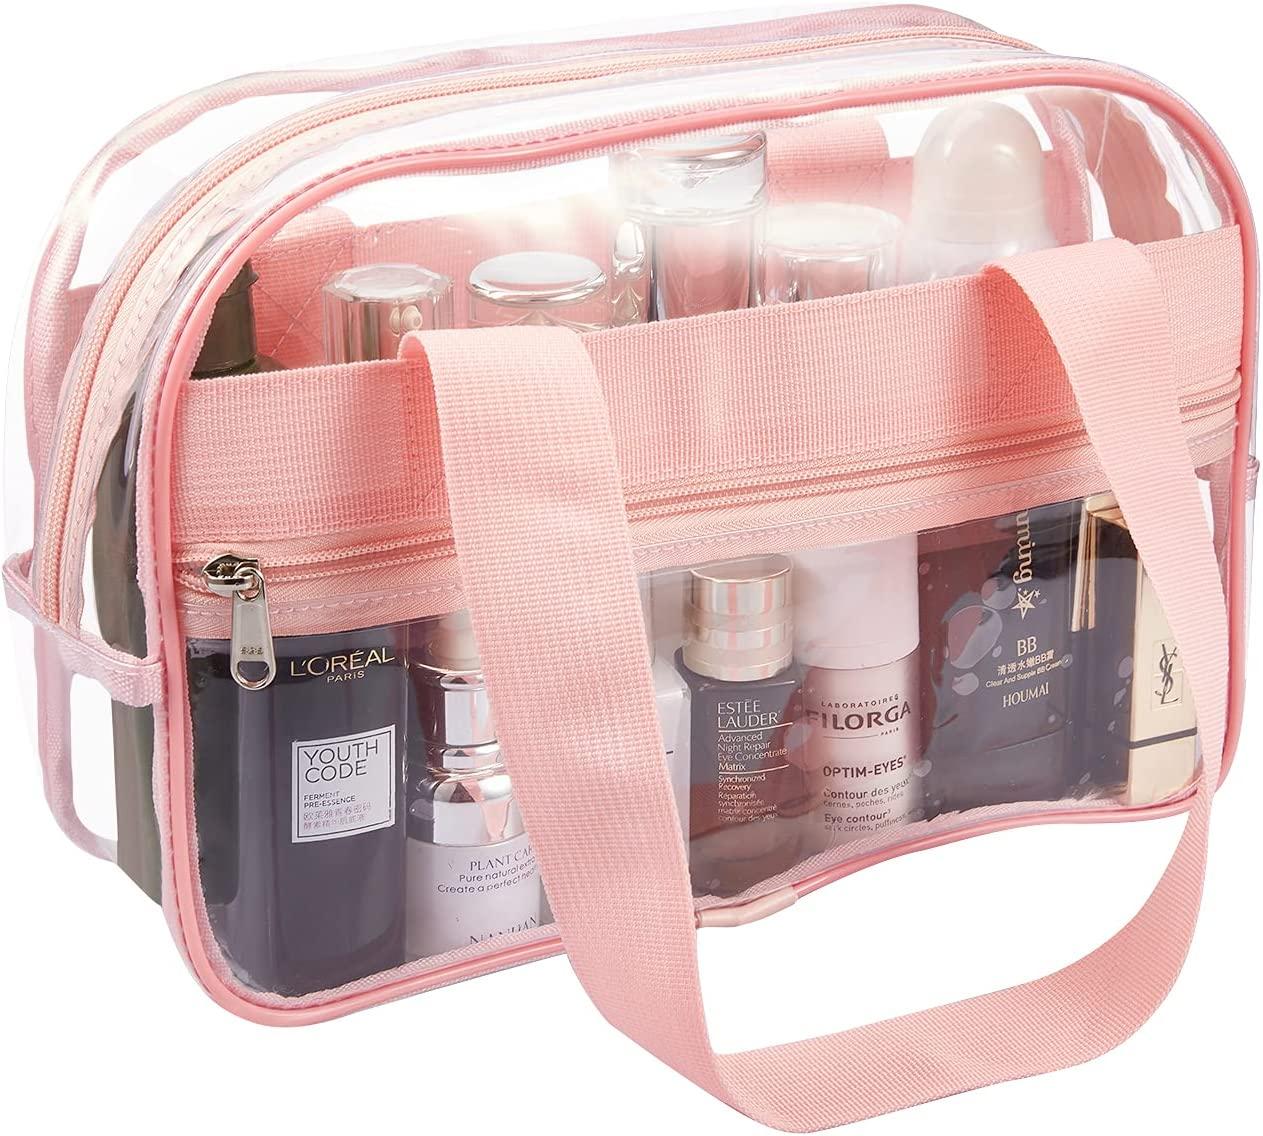 TOURDREAM Clear Bag Cover Pouch